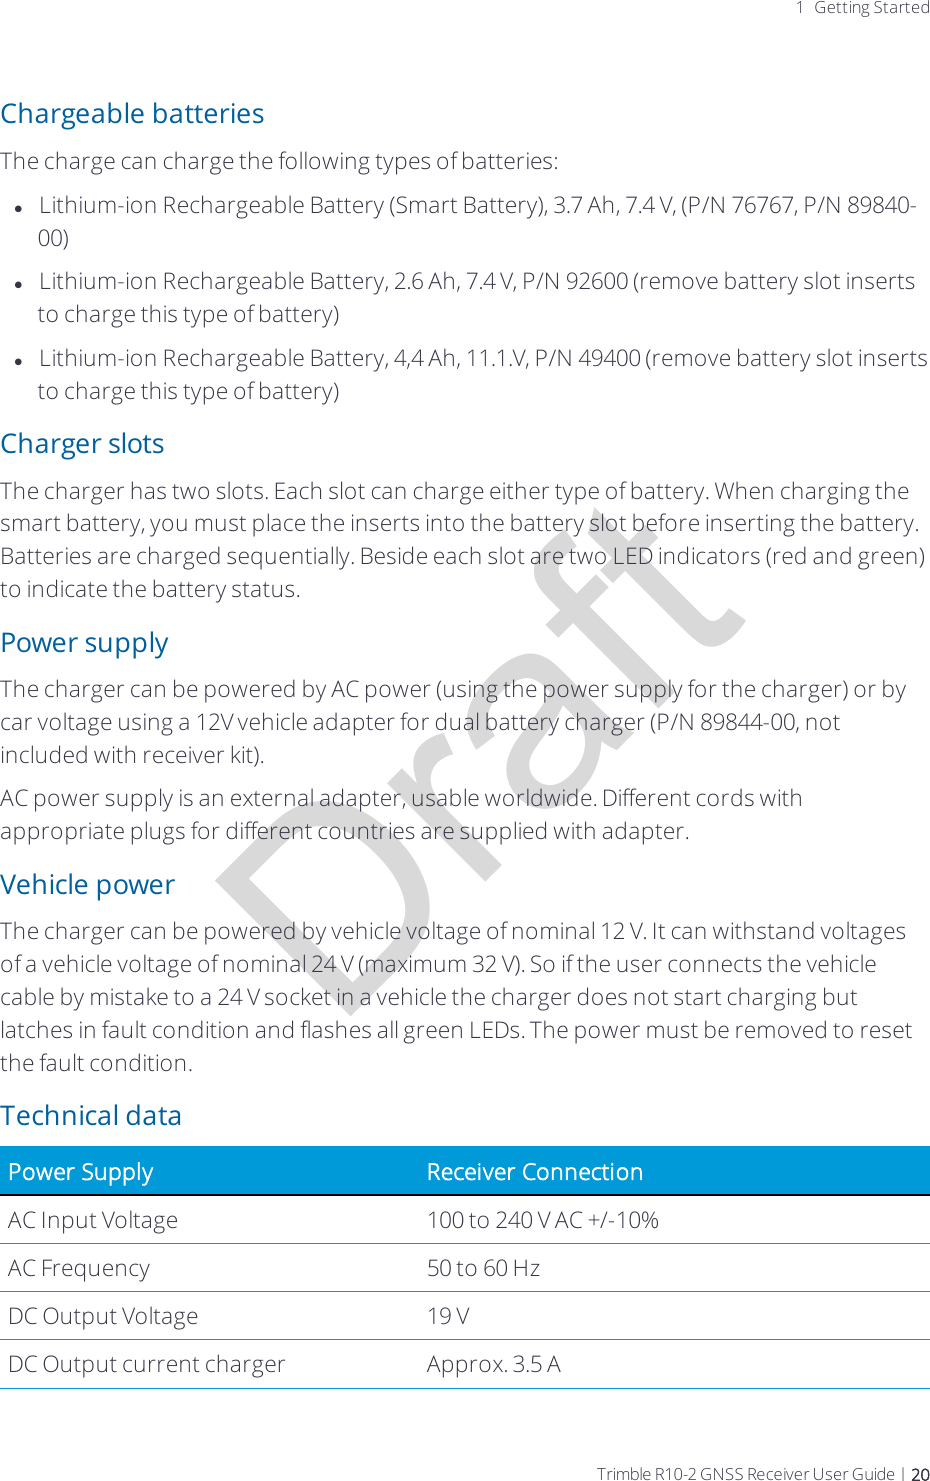 Draft1 Getting StartedChargeable batteriesThe charge can charge the following types of batteries:lLithium-ion Rechargeable Battery (Smart Battery), 3.7 Ah, 7.4 V, (P/N 76767, P/N 89840-00)lLithium-ion Rechargeable Battery, 2.6 Ah, 7.4 V, P/N 92600 (remove battery slot inserts to charge this type of battery)lLithium-ion Rechargeable Battery, 4,4 Ah, 11.1.V, P/N 49400 (remove battery slot inserts to charge this type of battery)Charger slotsThe charger has two slots. Each slot can charge either type of battery. When charging the smart battery, you must place the inserts into the battery slot before inserting the battery. Batteries are charged sequentially. Beside each slot are two LED indicators (red and green) to indicate the battery status.Power supplyThe charger can be powered by AC power (using the power supply for the charger) or by car voltage using a 12V vehicle adapter for dual battery charger (P/N 89844-00, not included with receiver kit).AC power supply is an external adapter, usable worldwide. Different cords with appropriate plugs for different countries are supplied with adapter.Vehicle powerThe charger can be powered by vehicle voltage of nominal 12 V. It can withstand voltages of a vehicle voltage of nominal 24 V (maximum 32 V). So if the user connects the vehicle cable by mistake to a 24 V socket in a vehicle the charger does not start charging but latches in fault condition and flashes all green LEDs. The power must be removed to reset the fault condition.Technical dataPower Supply Receiver ConnectionAC Input Voltage 100 to 240 V AC +/-10%AC Frequency 50 to 60 HzDC Output Voltage 19 VDC Output current charger Approx. 3.5 ATrimble R10-2 GNSS Receiver User Guide | 20